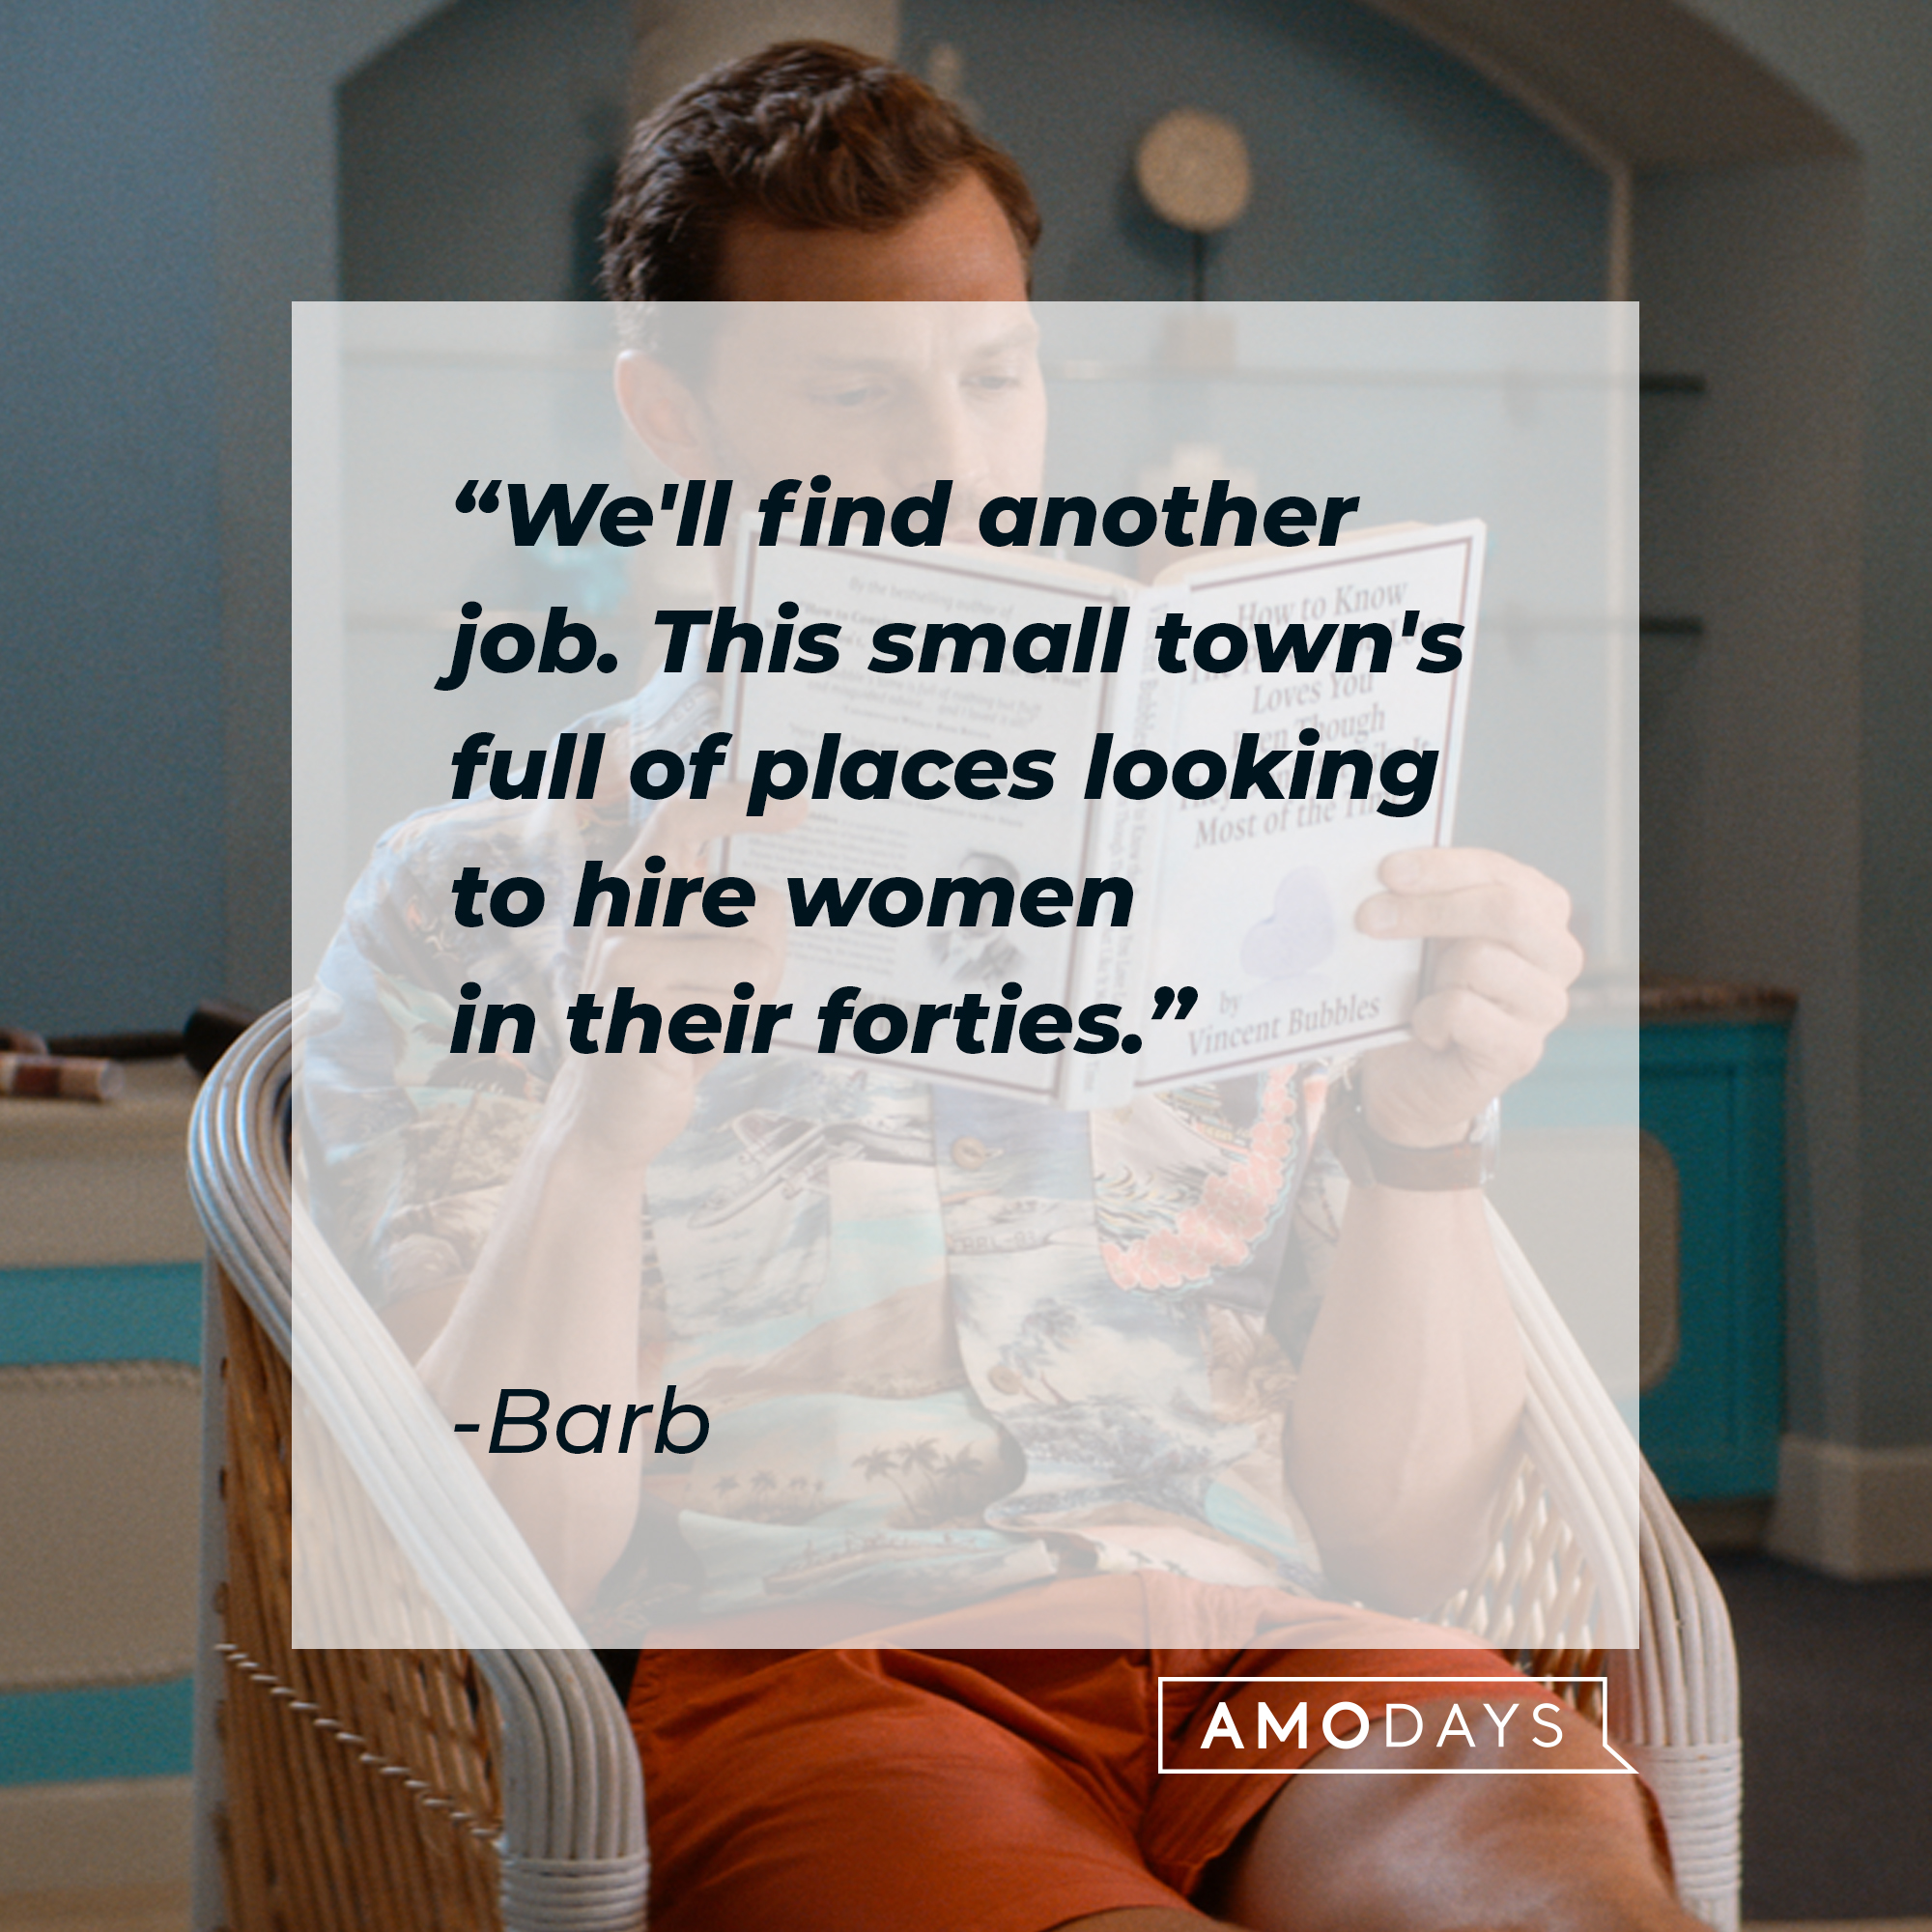 Barb's quote: "We'll find another job. This small town's full of places looking to hire women in their forties." | Source: facebook.com/BarbAndStar